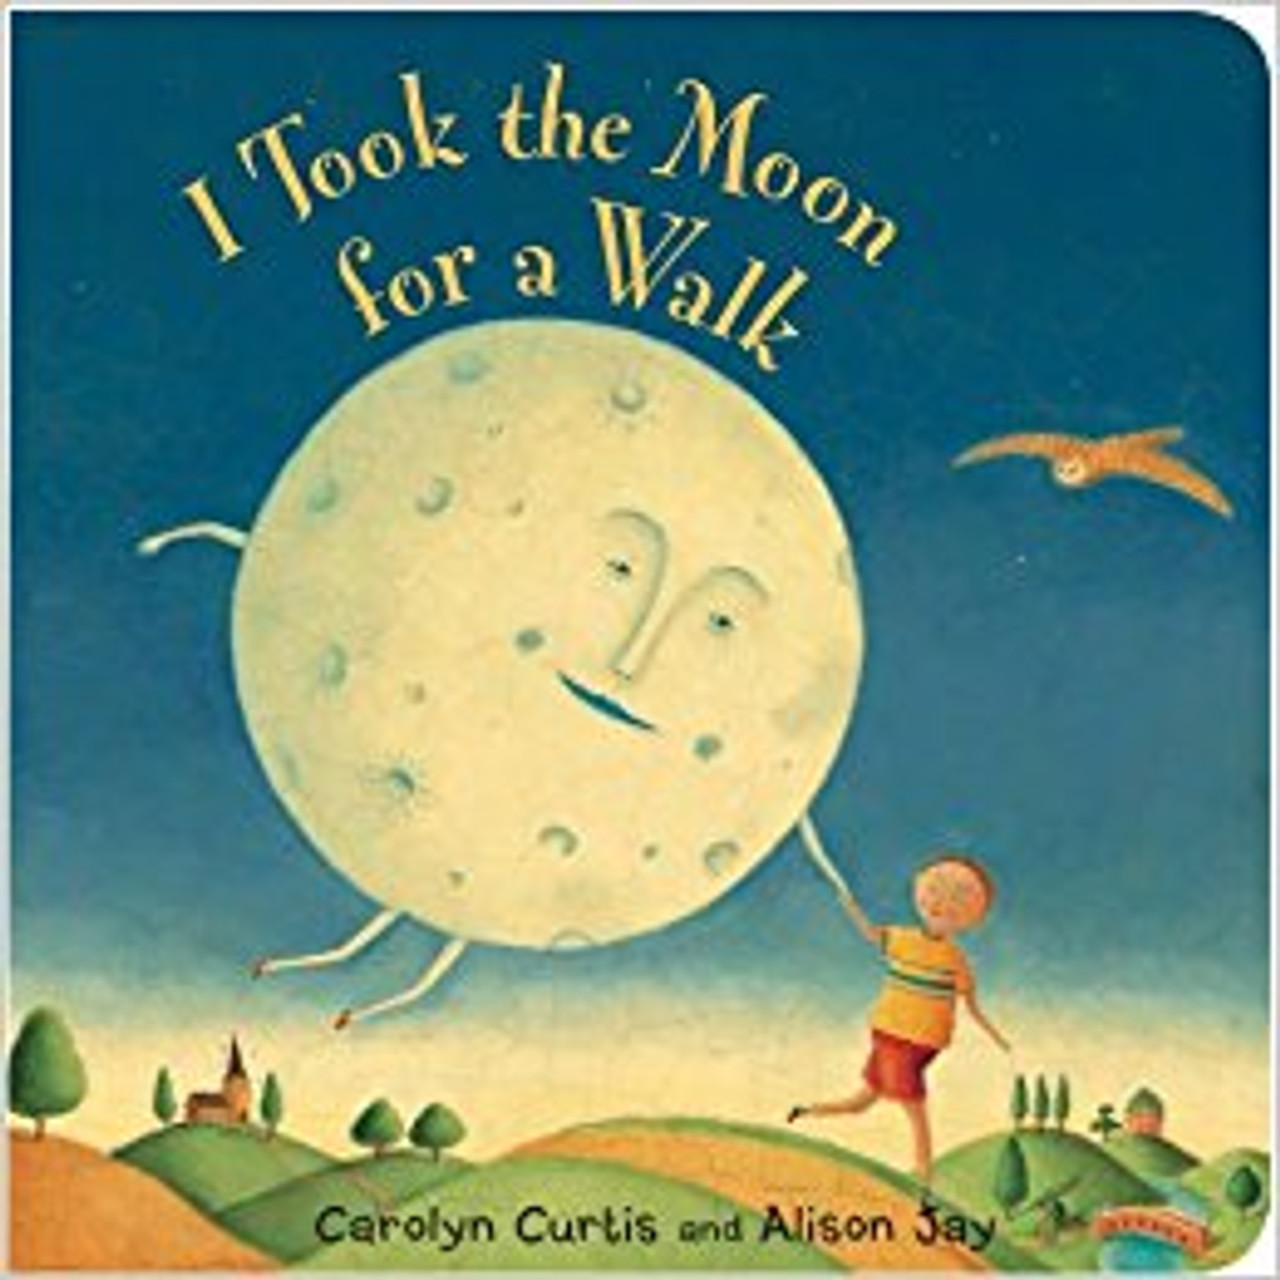 When the day has ended and everyone else has fallen asleep, a young boy embarks on a magical adventure with his friend the Moon.  Their unusual journey is descriged in lyrical verse, creating a enchanting story that celebrates the serene beauty of the world.